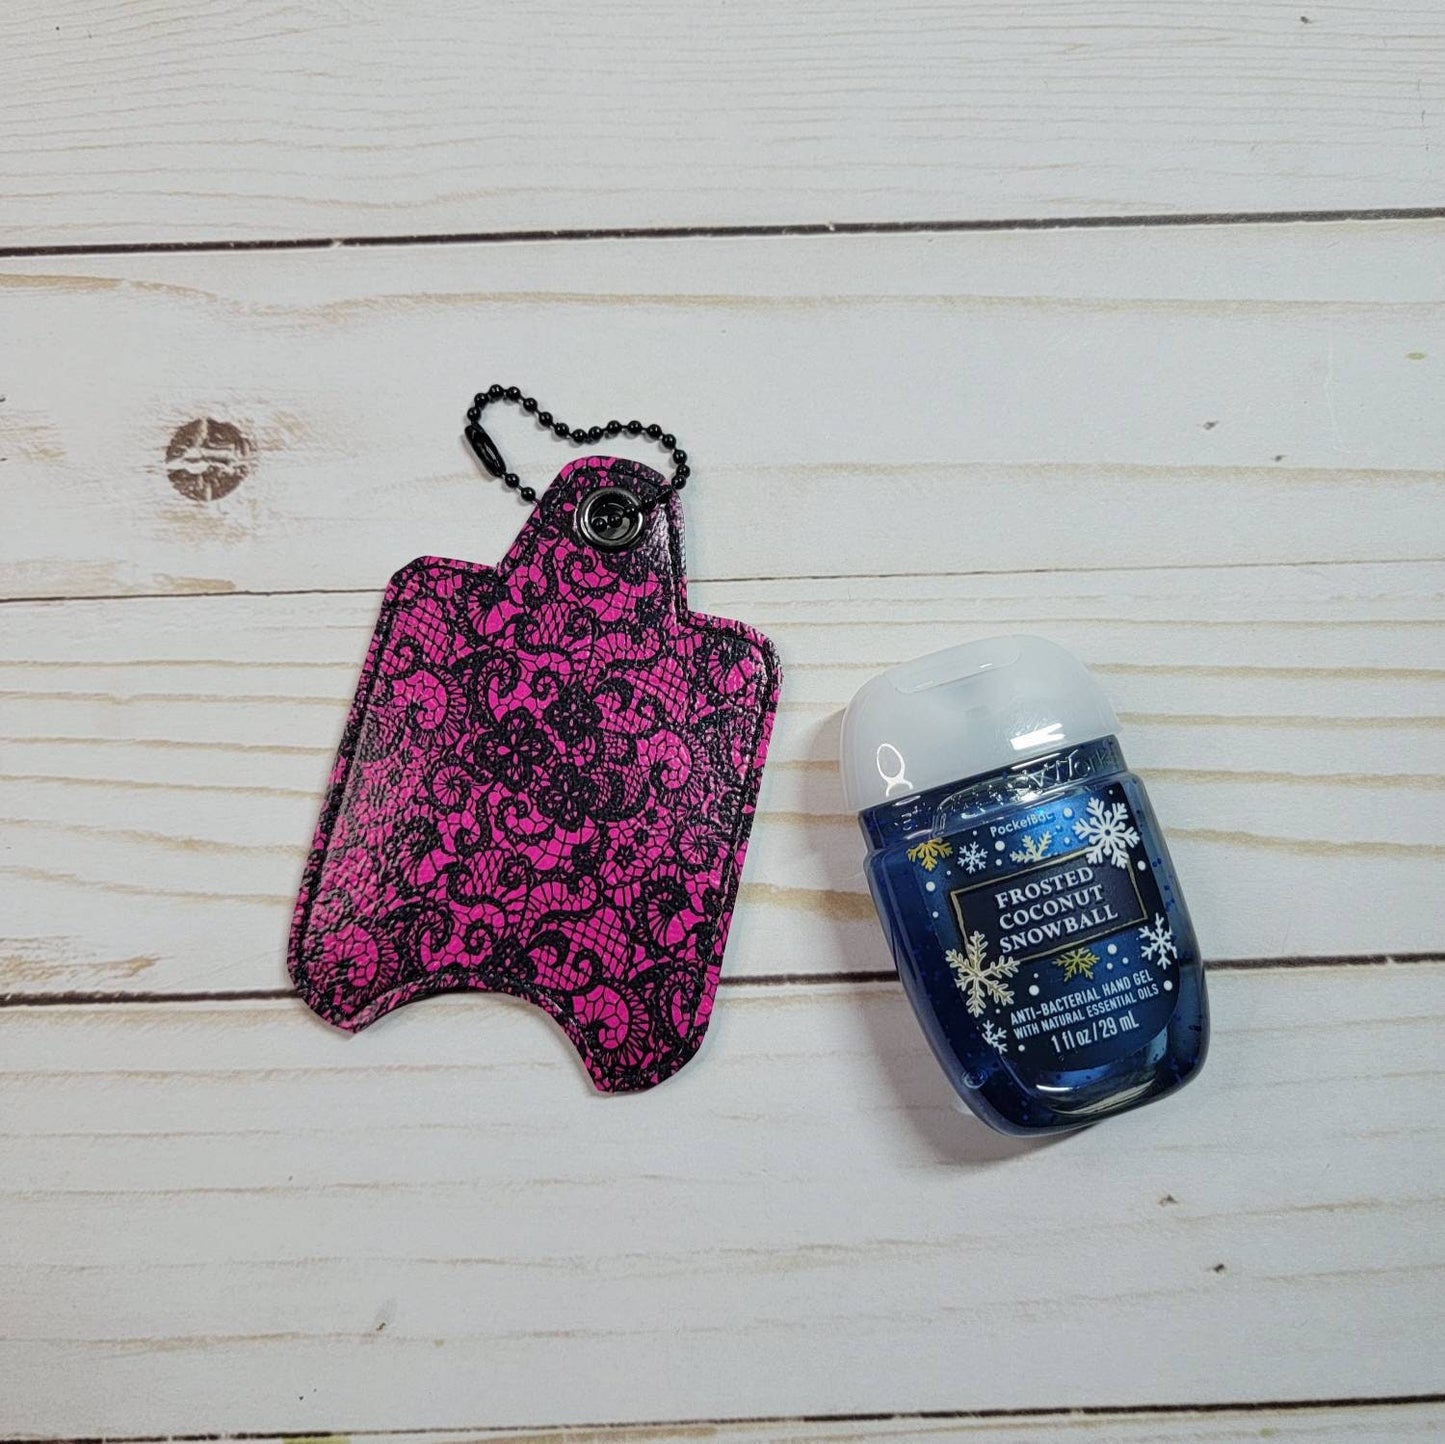 Pink and black lace// Hand sanitizer holder/ keychain/ embroidered